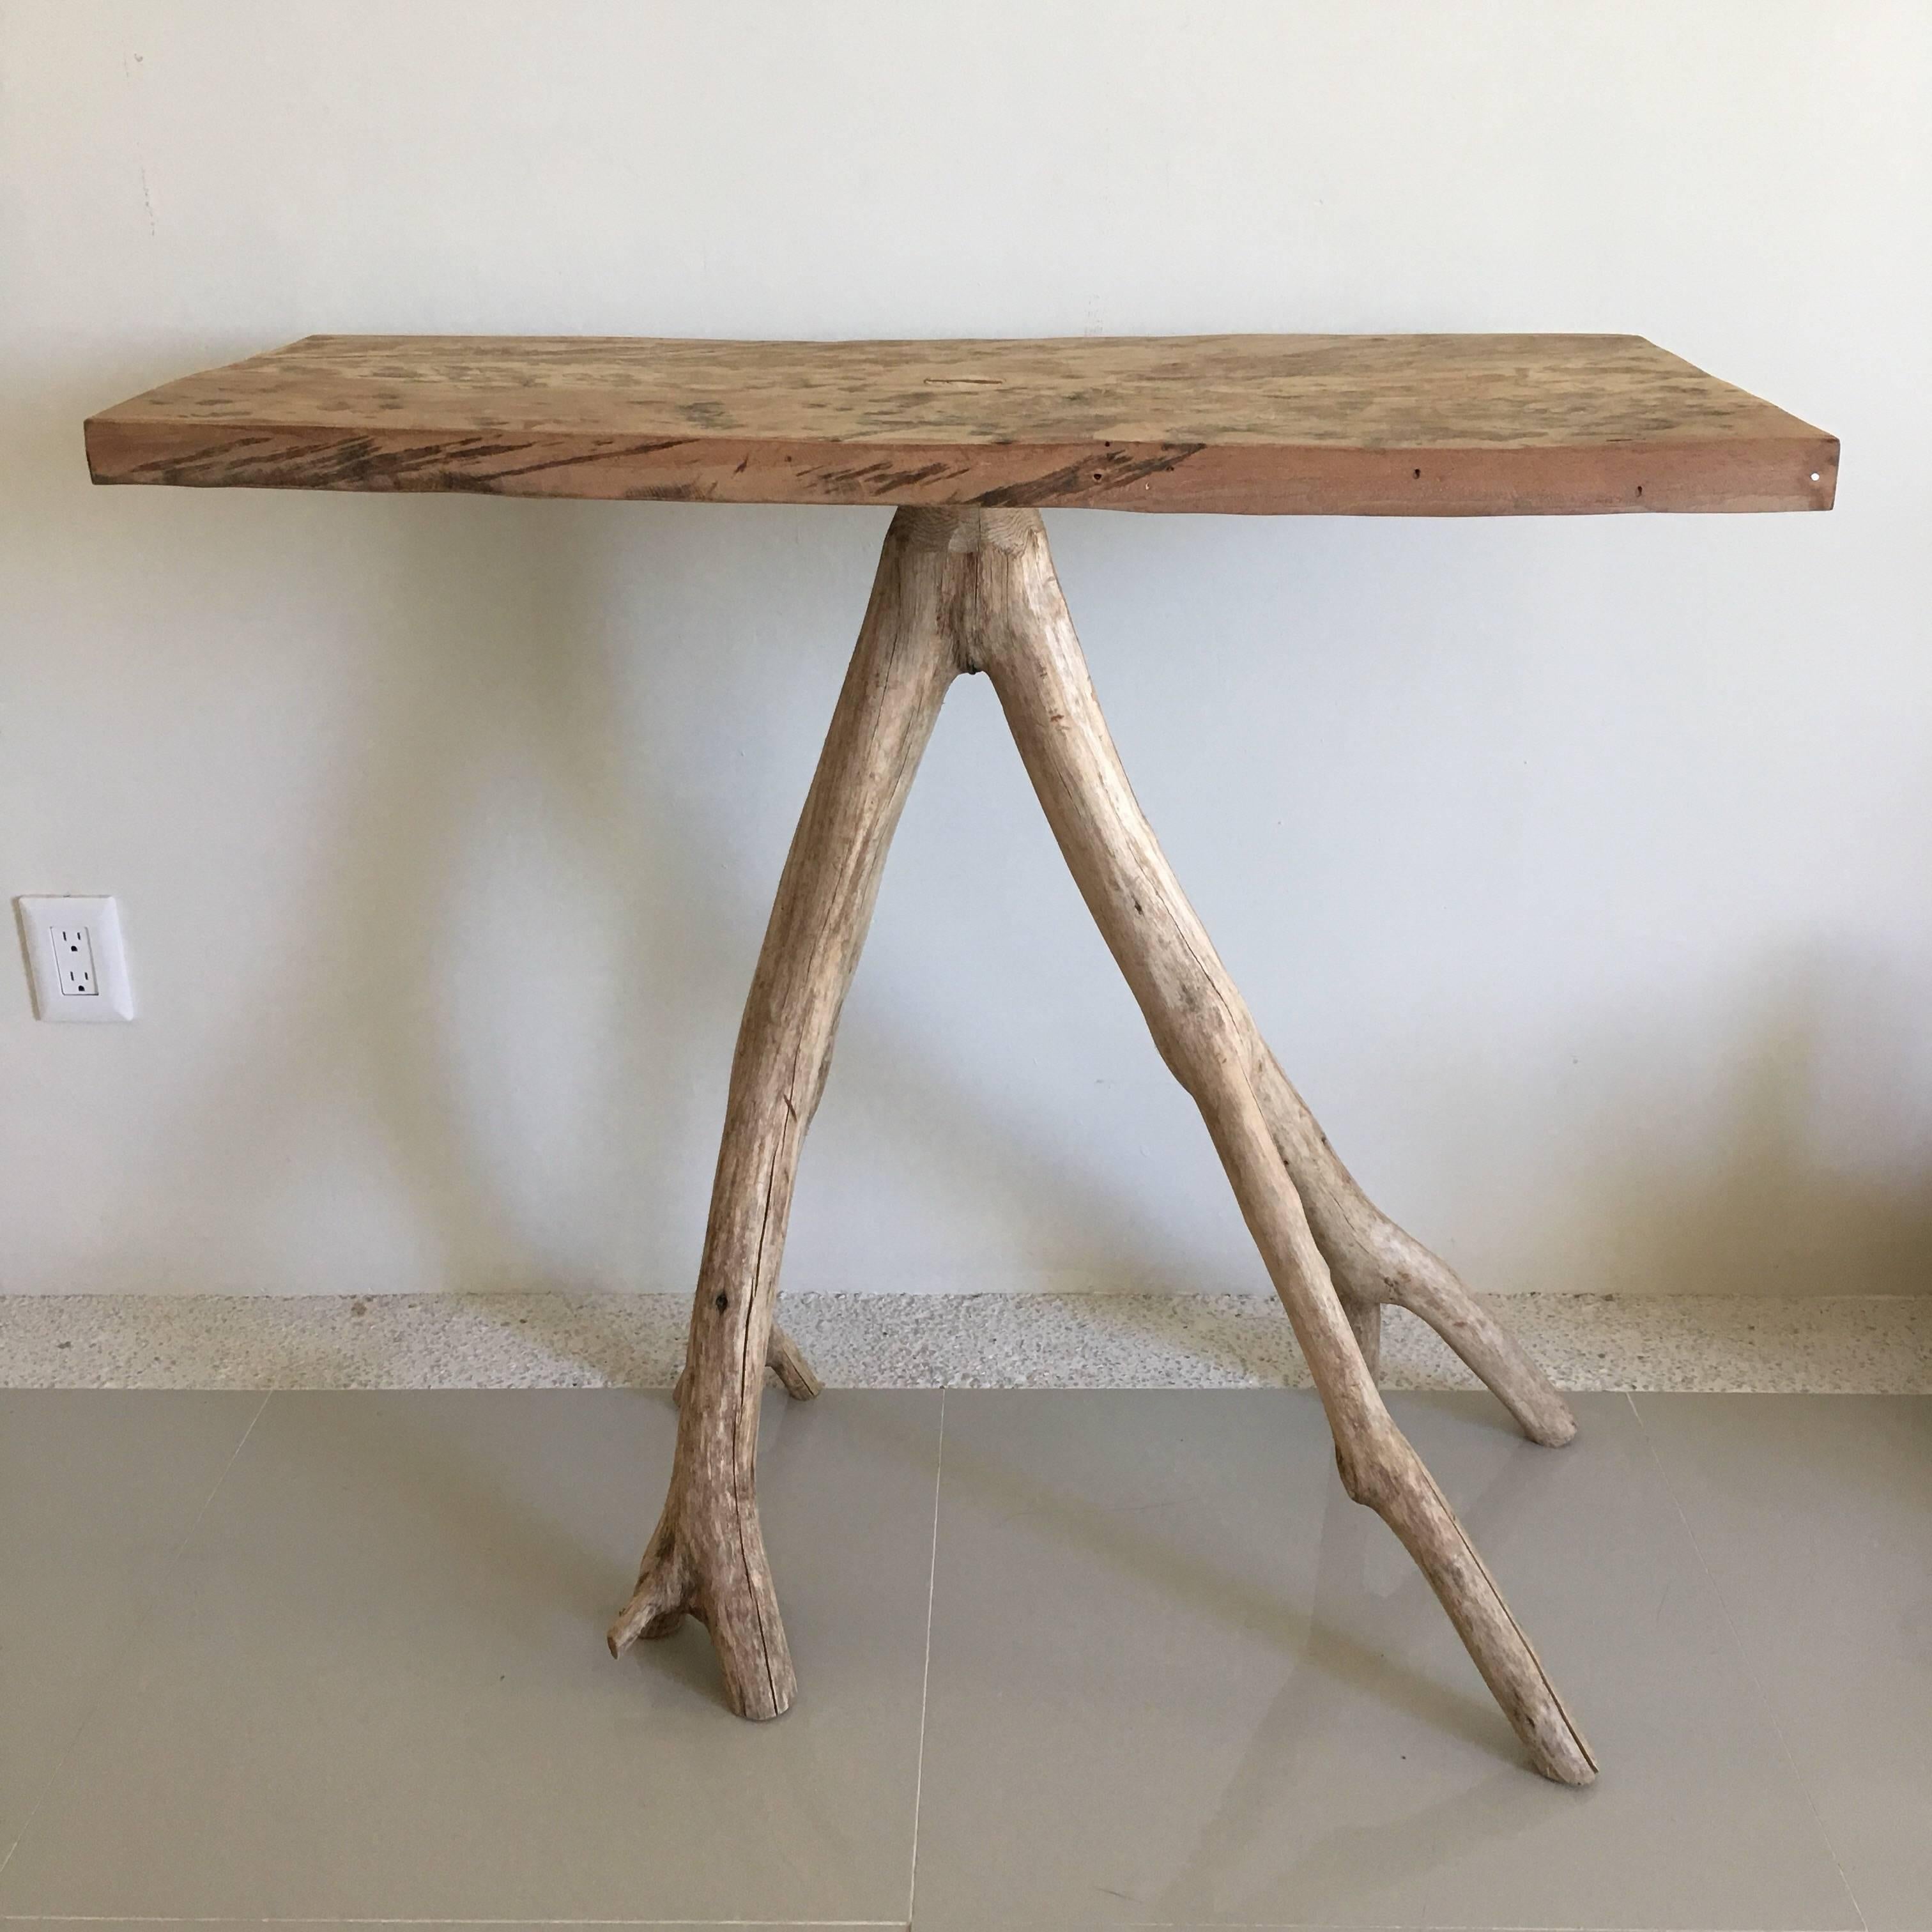 Newly fabricated, two-piece, one-of-a-kind hardwood table from the Jalisco rainforest in a Primitive style.